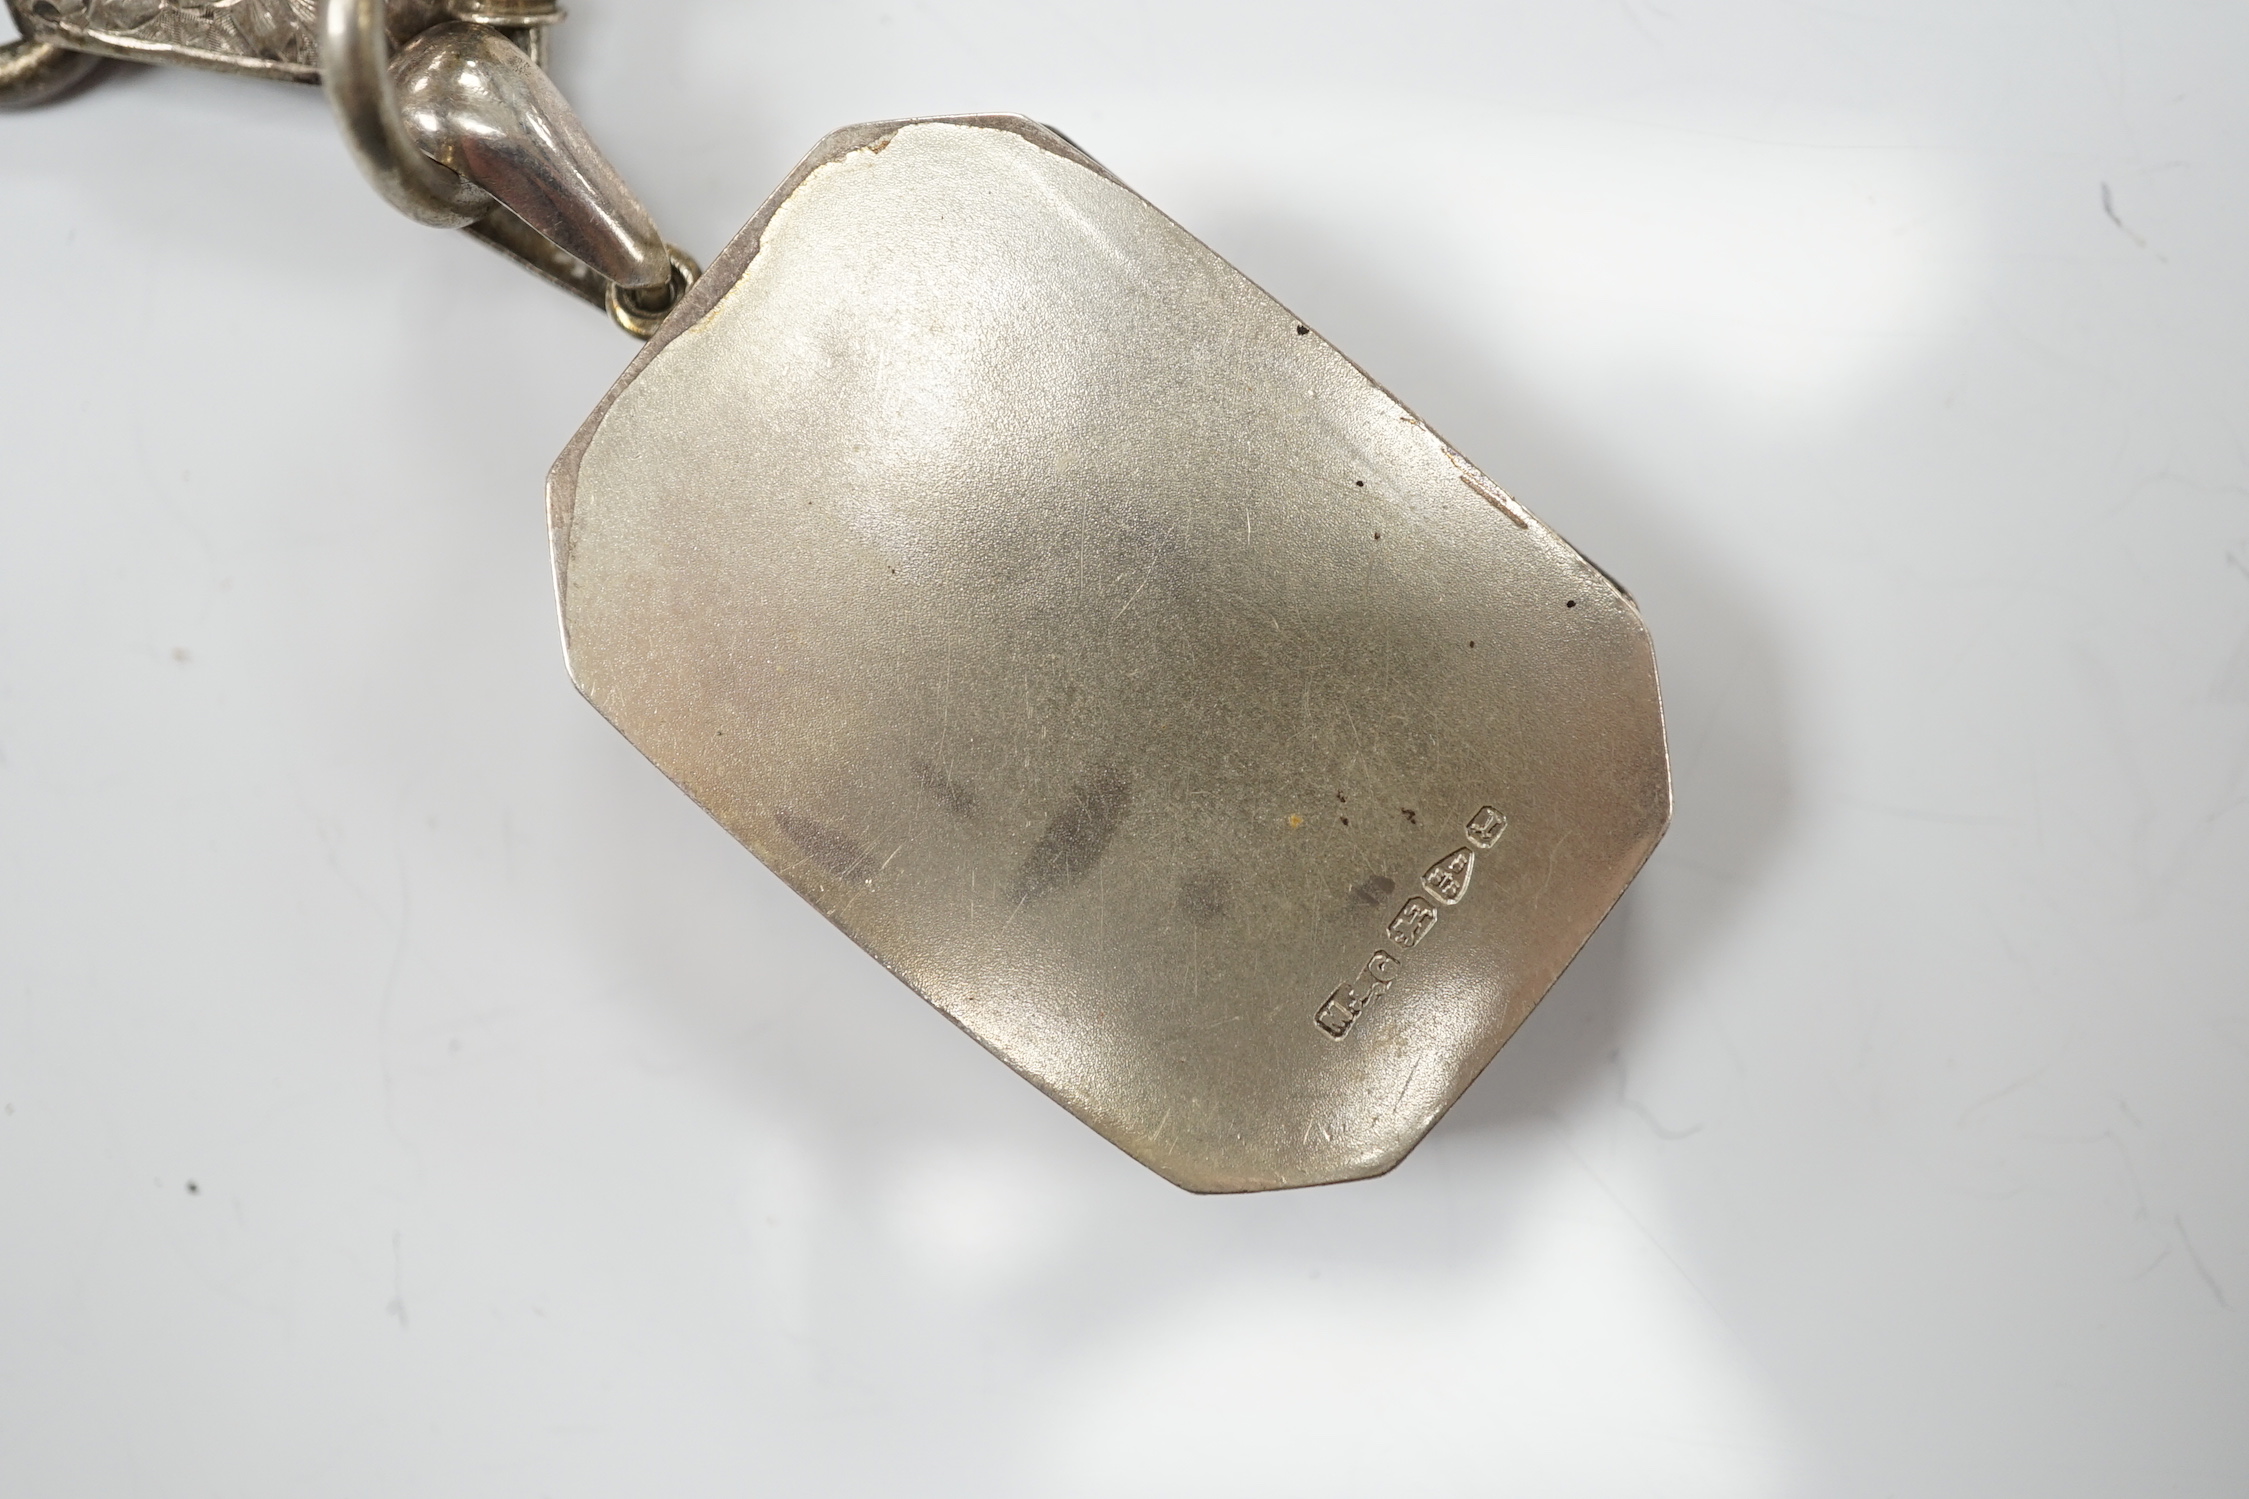 A Victorian silver octagonal locket, Chester, 1880, 44mm, on an engraved white metal chain.